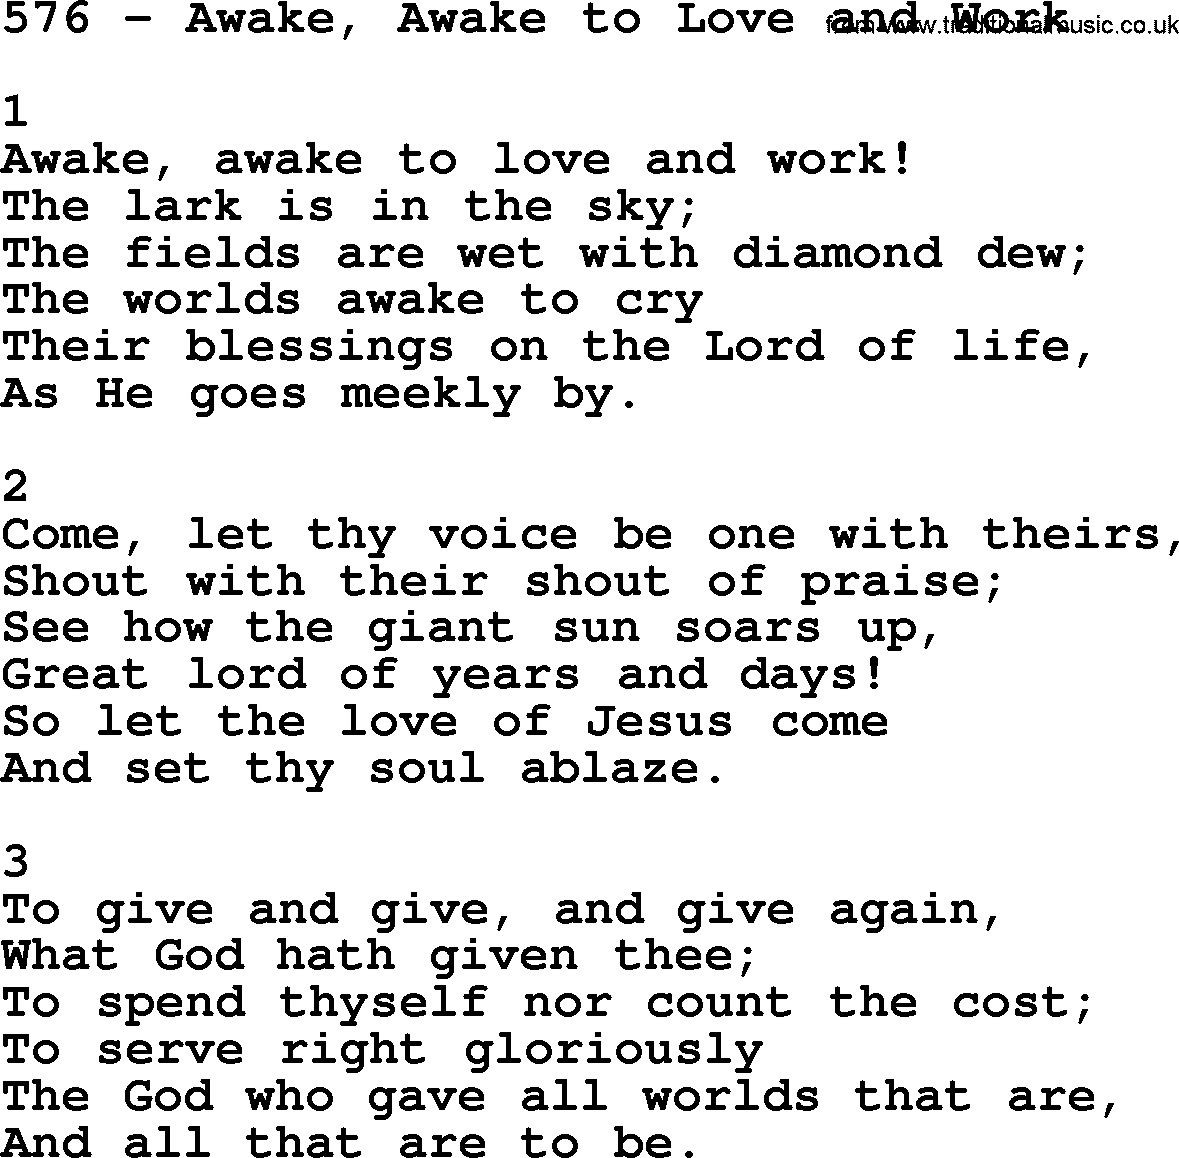 Complete Adventis Hymnal, title: 576-Awake, Awake To Love And Work, with lyrics, midi, mp3, powerpoints(PPT) and PDF,